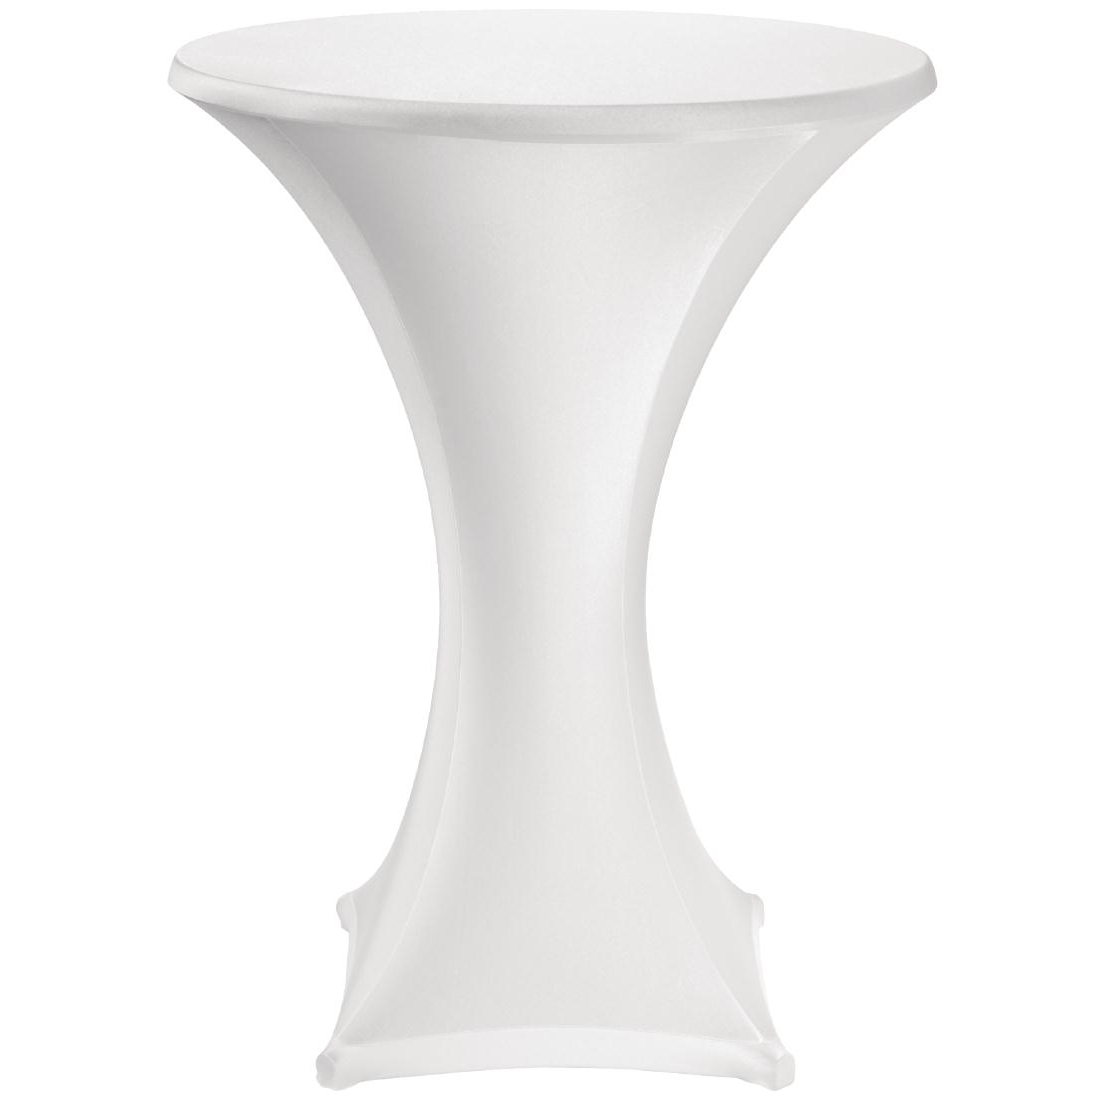 Jersey Stretch Table Cover - White